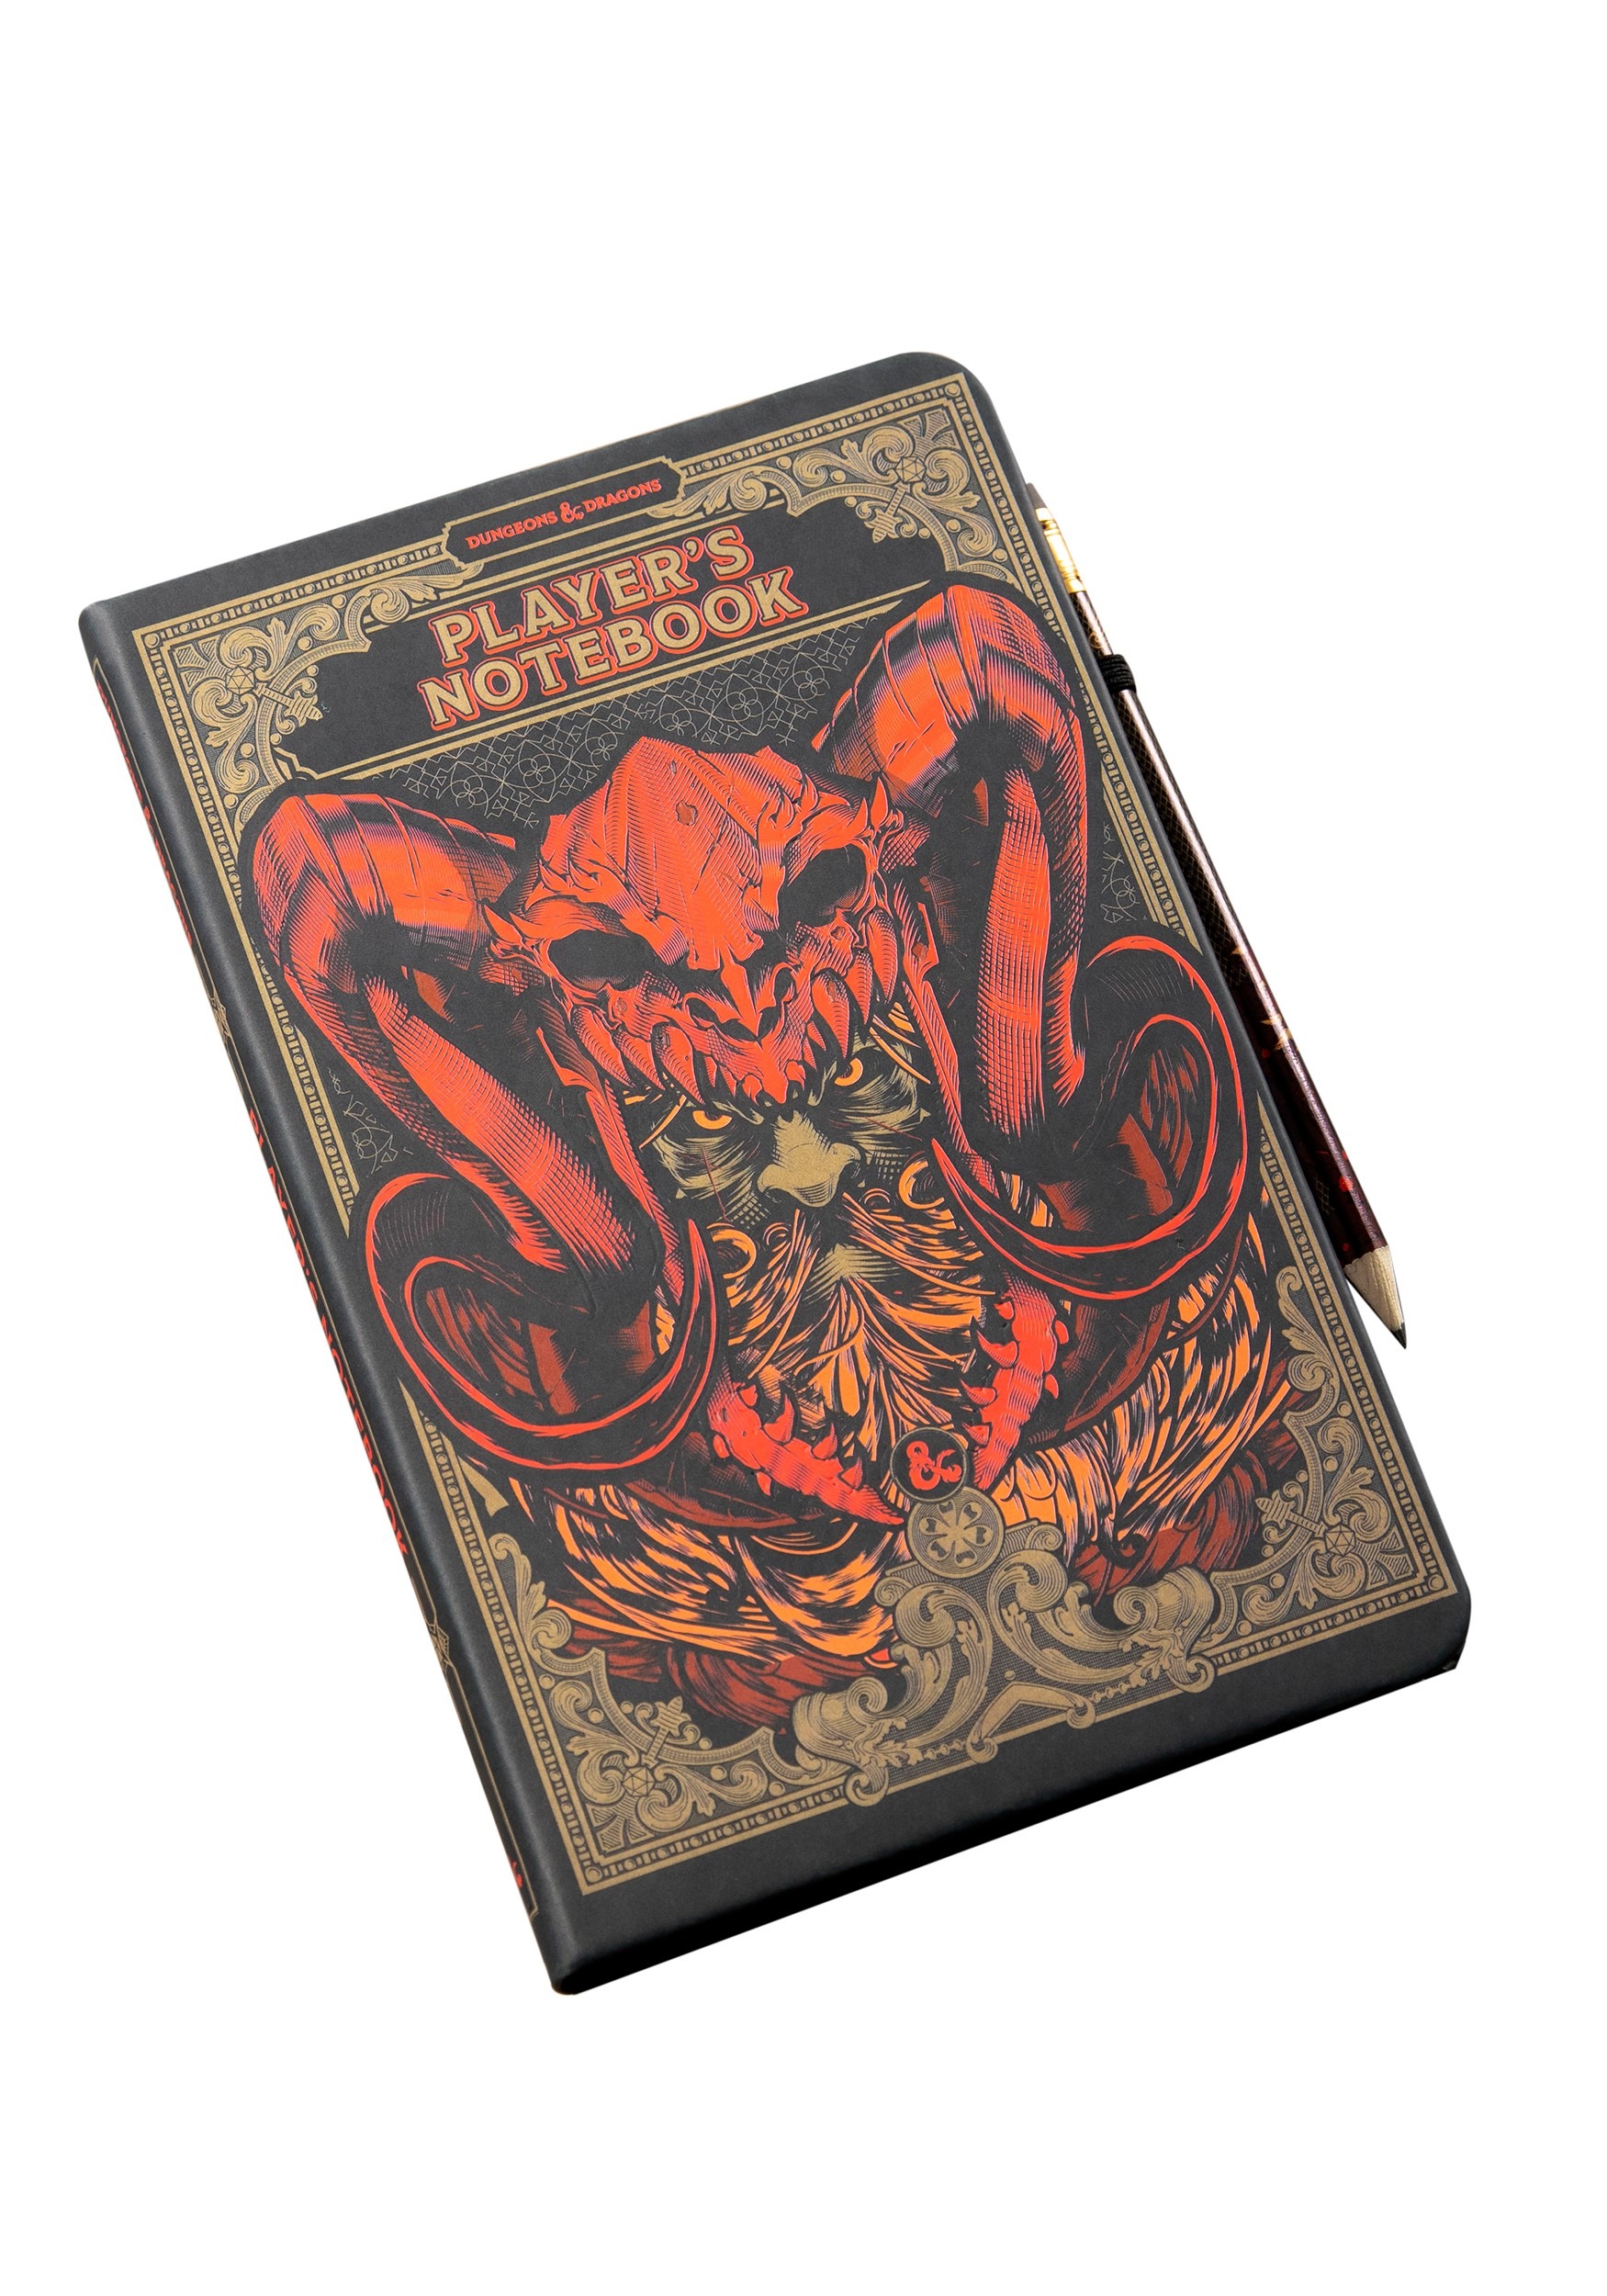 Dungeons & Dragons Notebook & Pencil